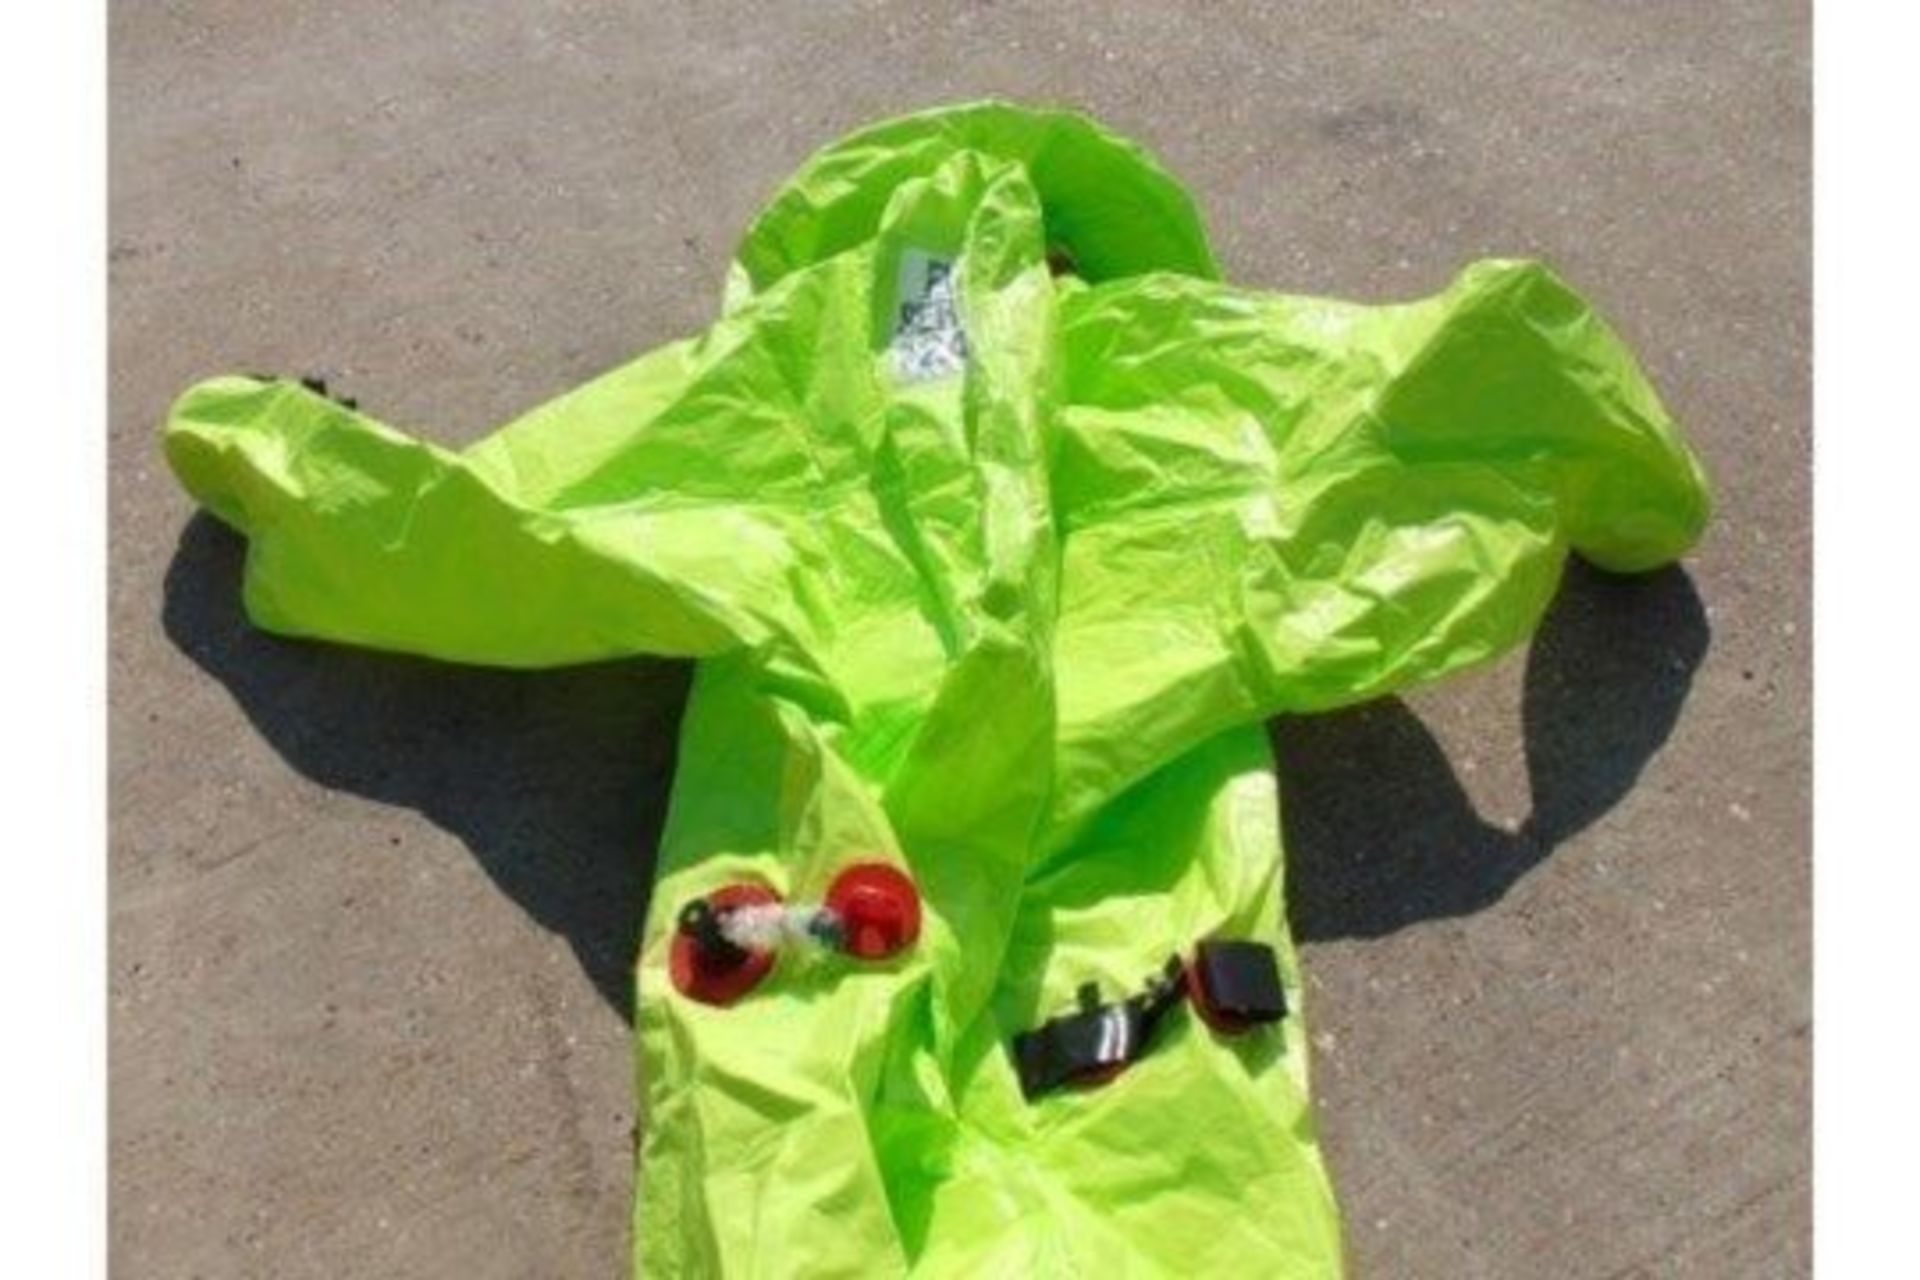 10 x Respirex Tychem TK Gas-Tight Hazmat Suit Type 1A with Attached Boots and Gloves. - Image 8 of 10